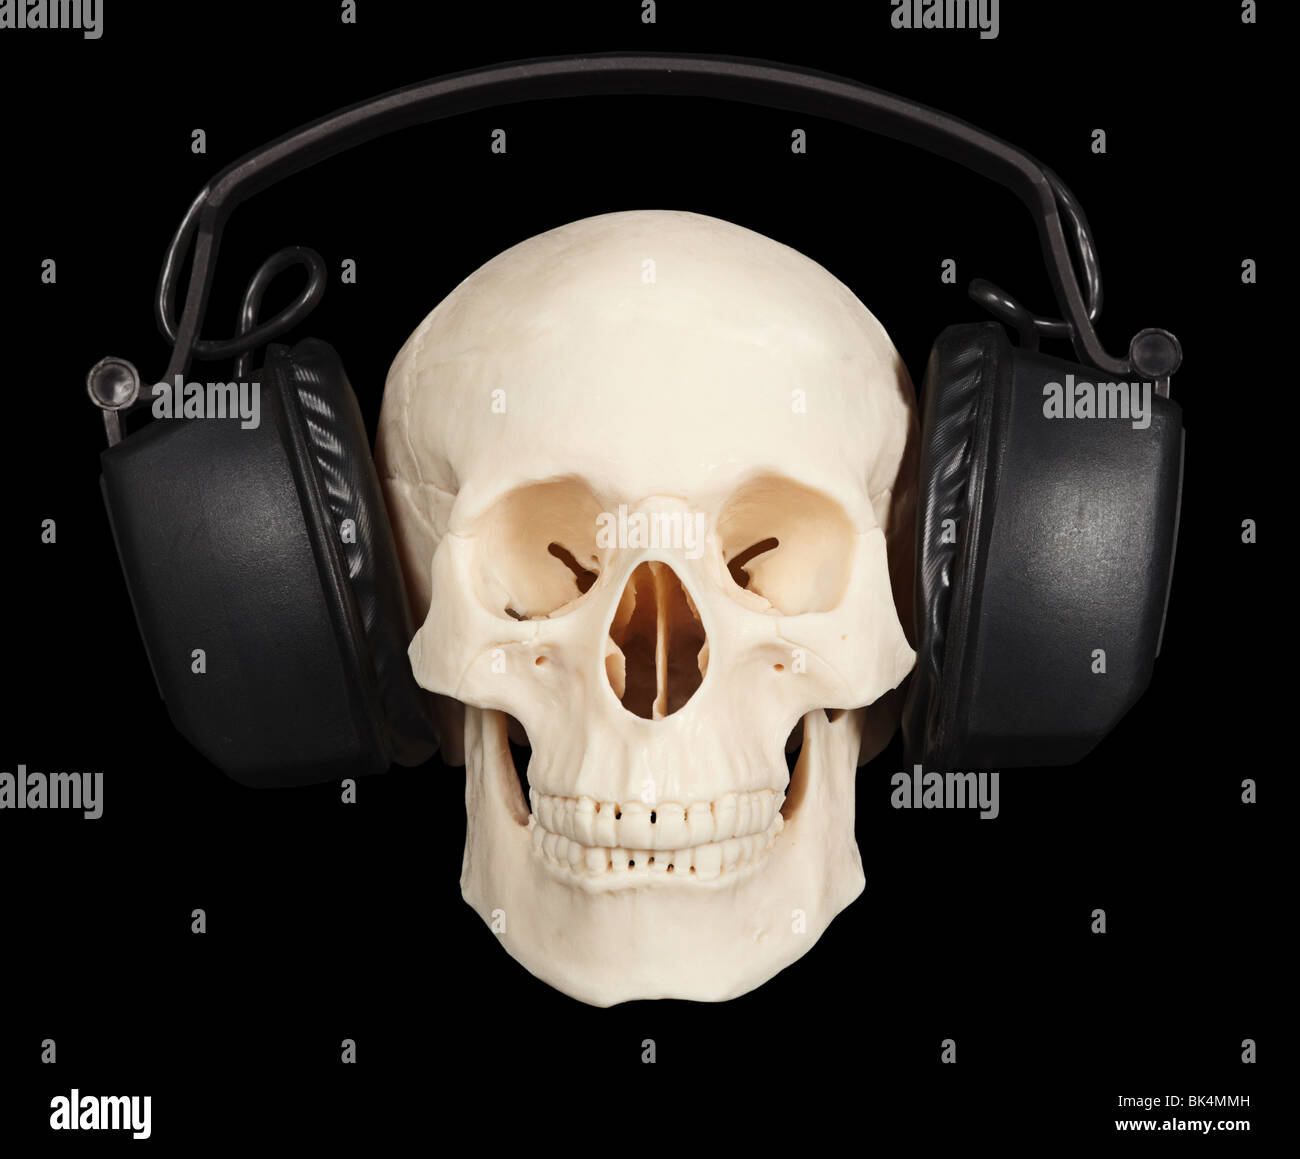 The human skull with stereo headphones on a black background Stock Photo